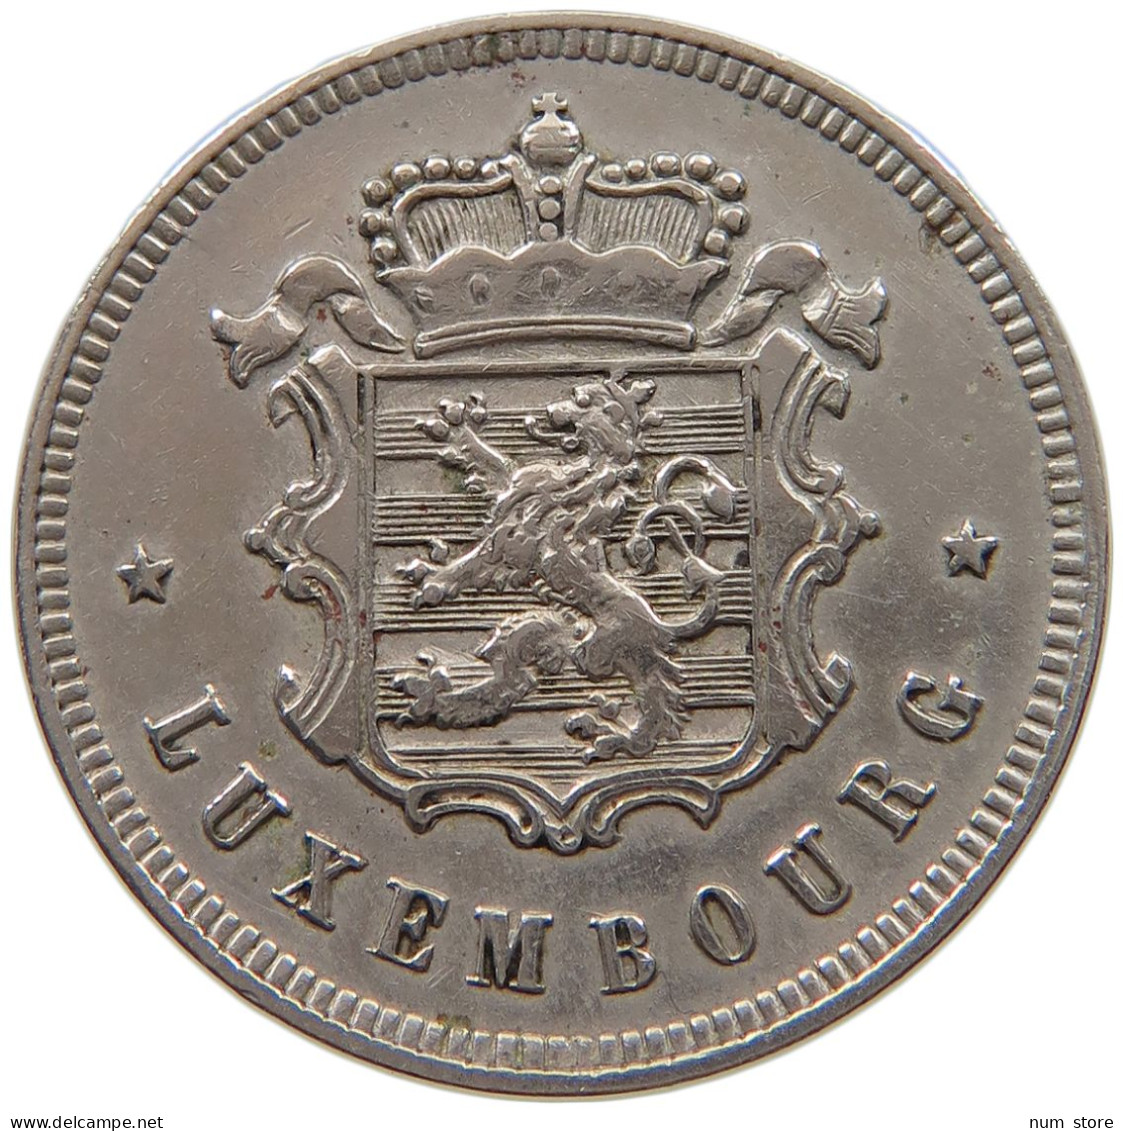 LUXEMBOURG 25 CENTIMES 1927 #a061 0247 - Luxembourg